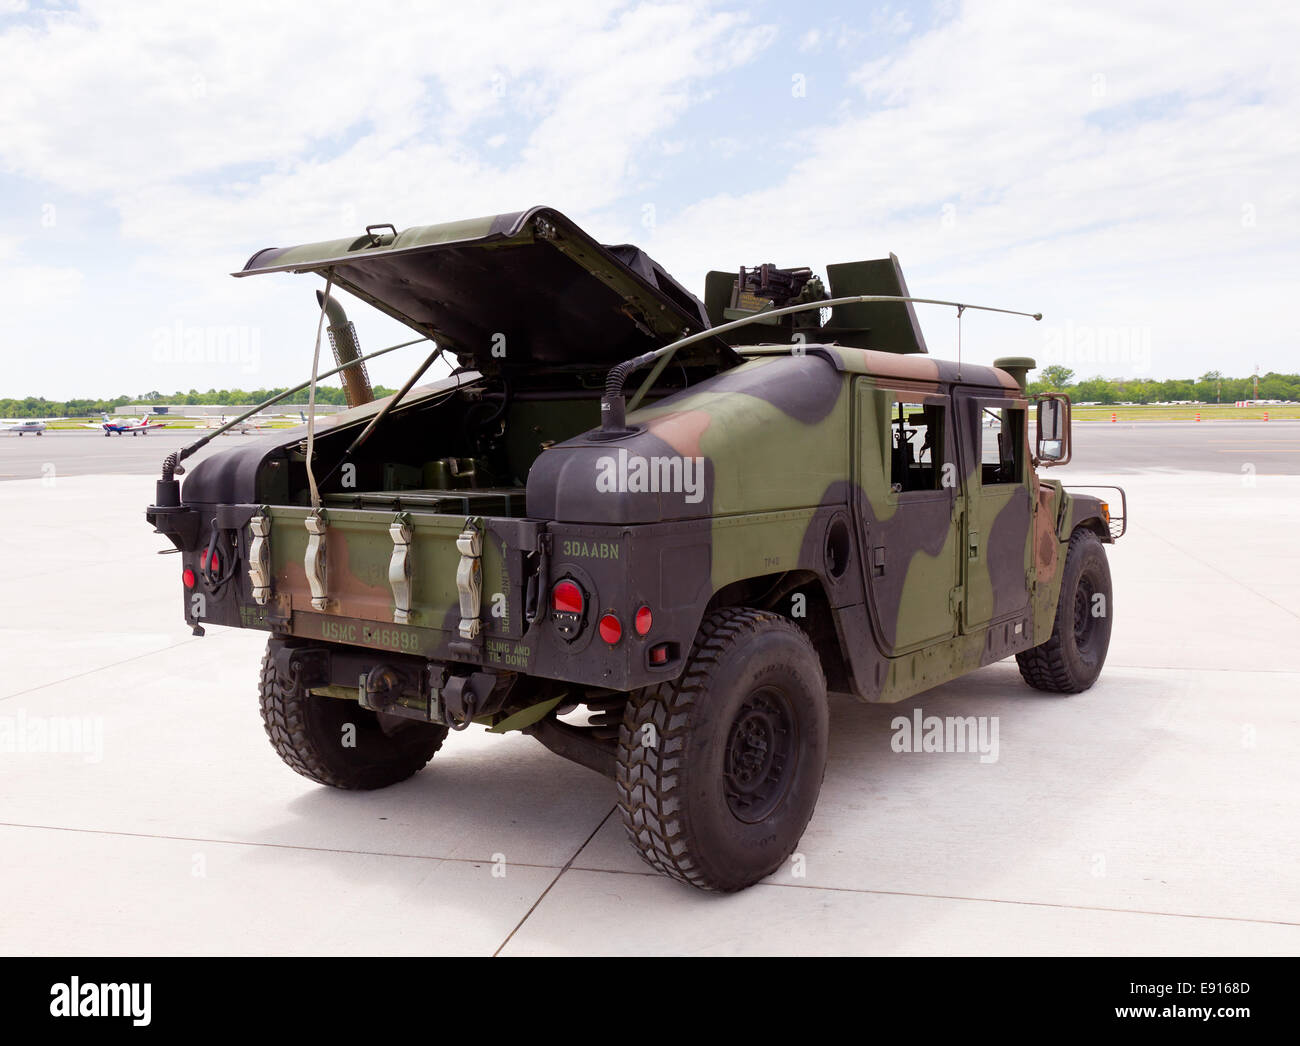 Army camouflaged Humvee truck Stock Photo